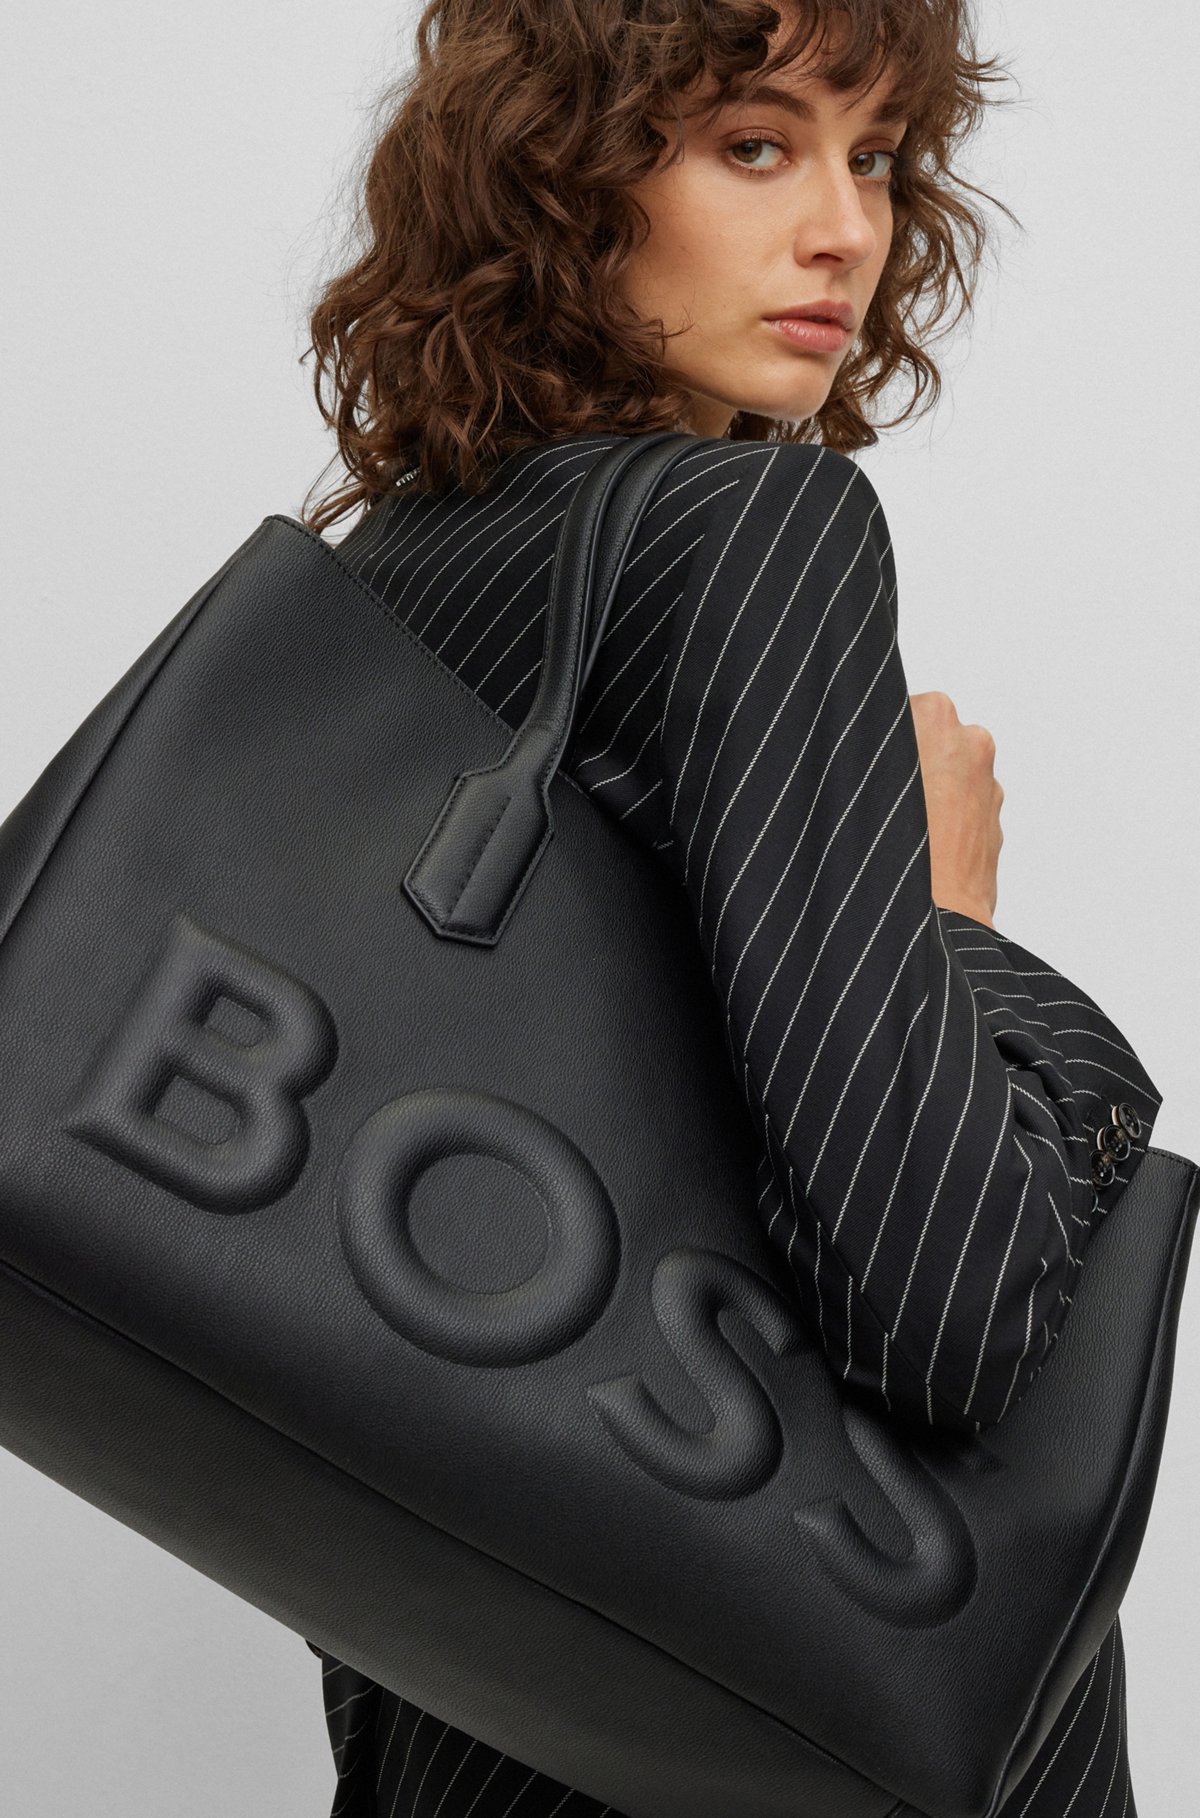 Tote bag in faux leather with debossed logo, Black